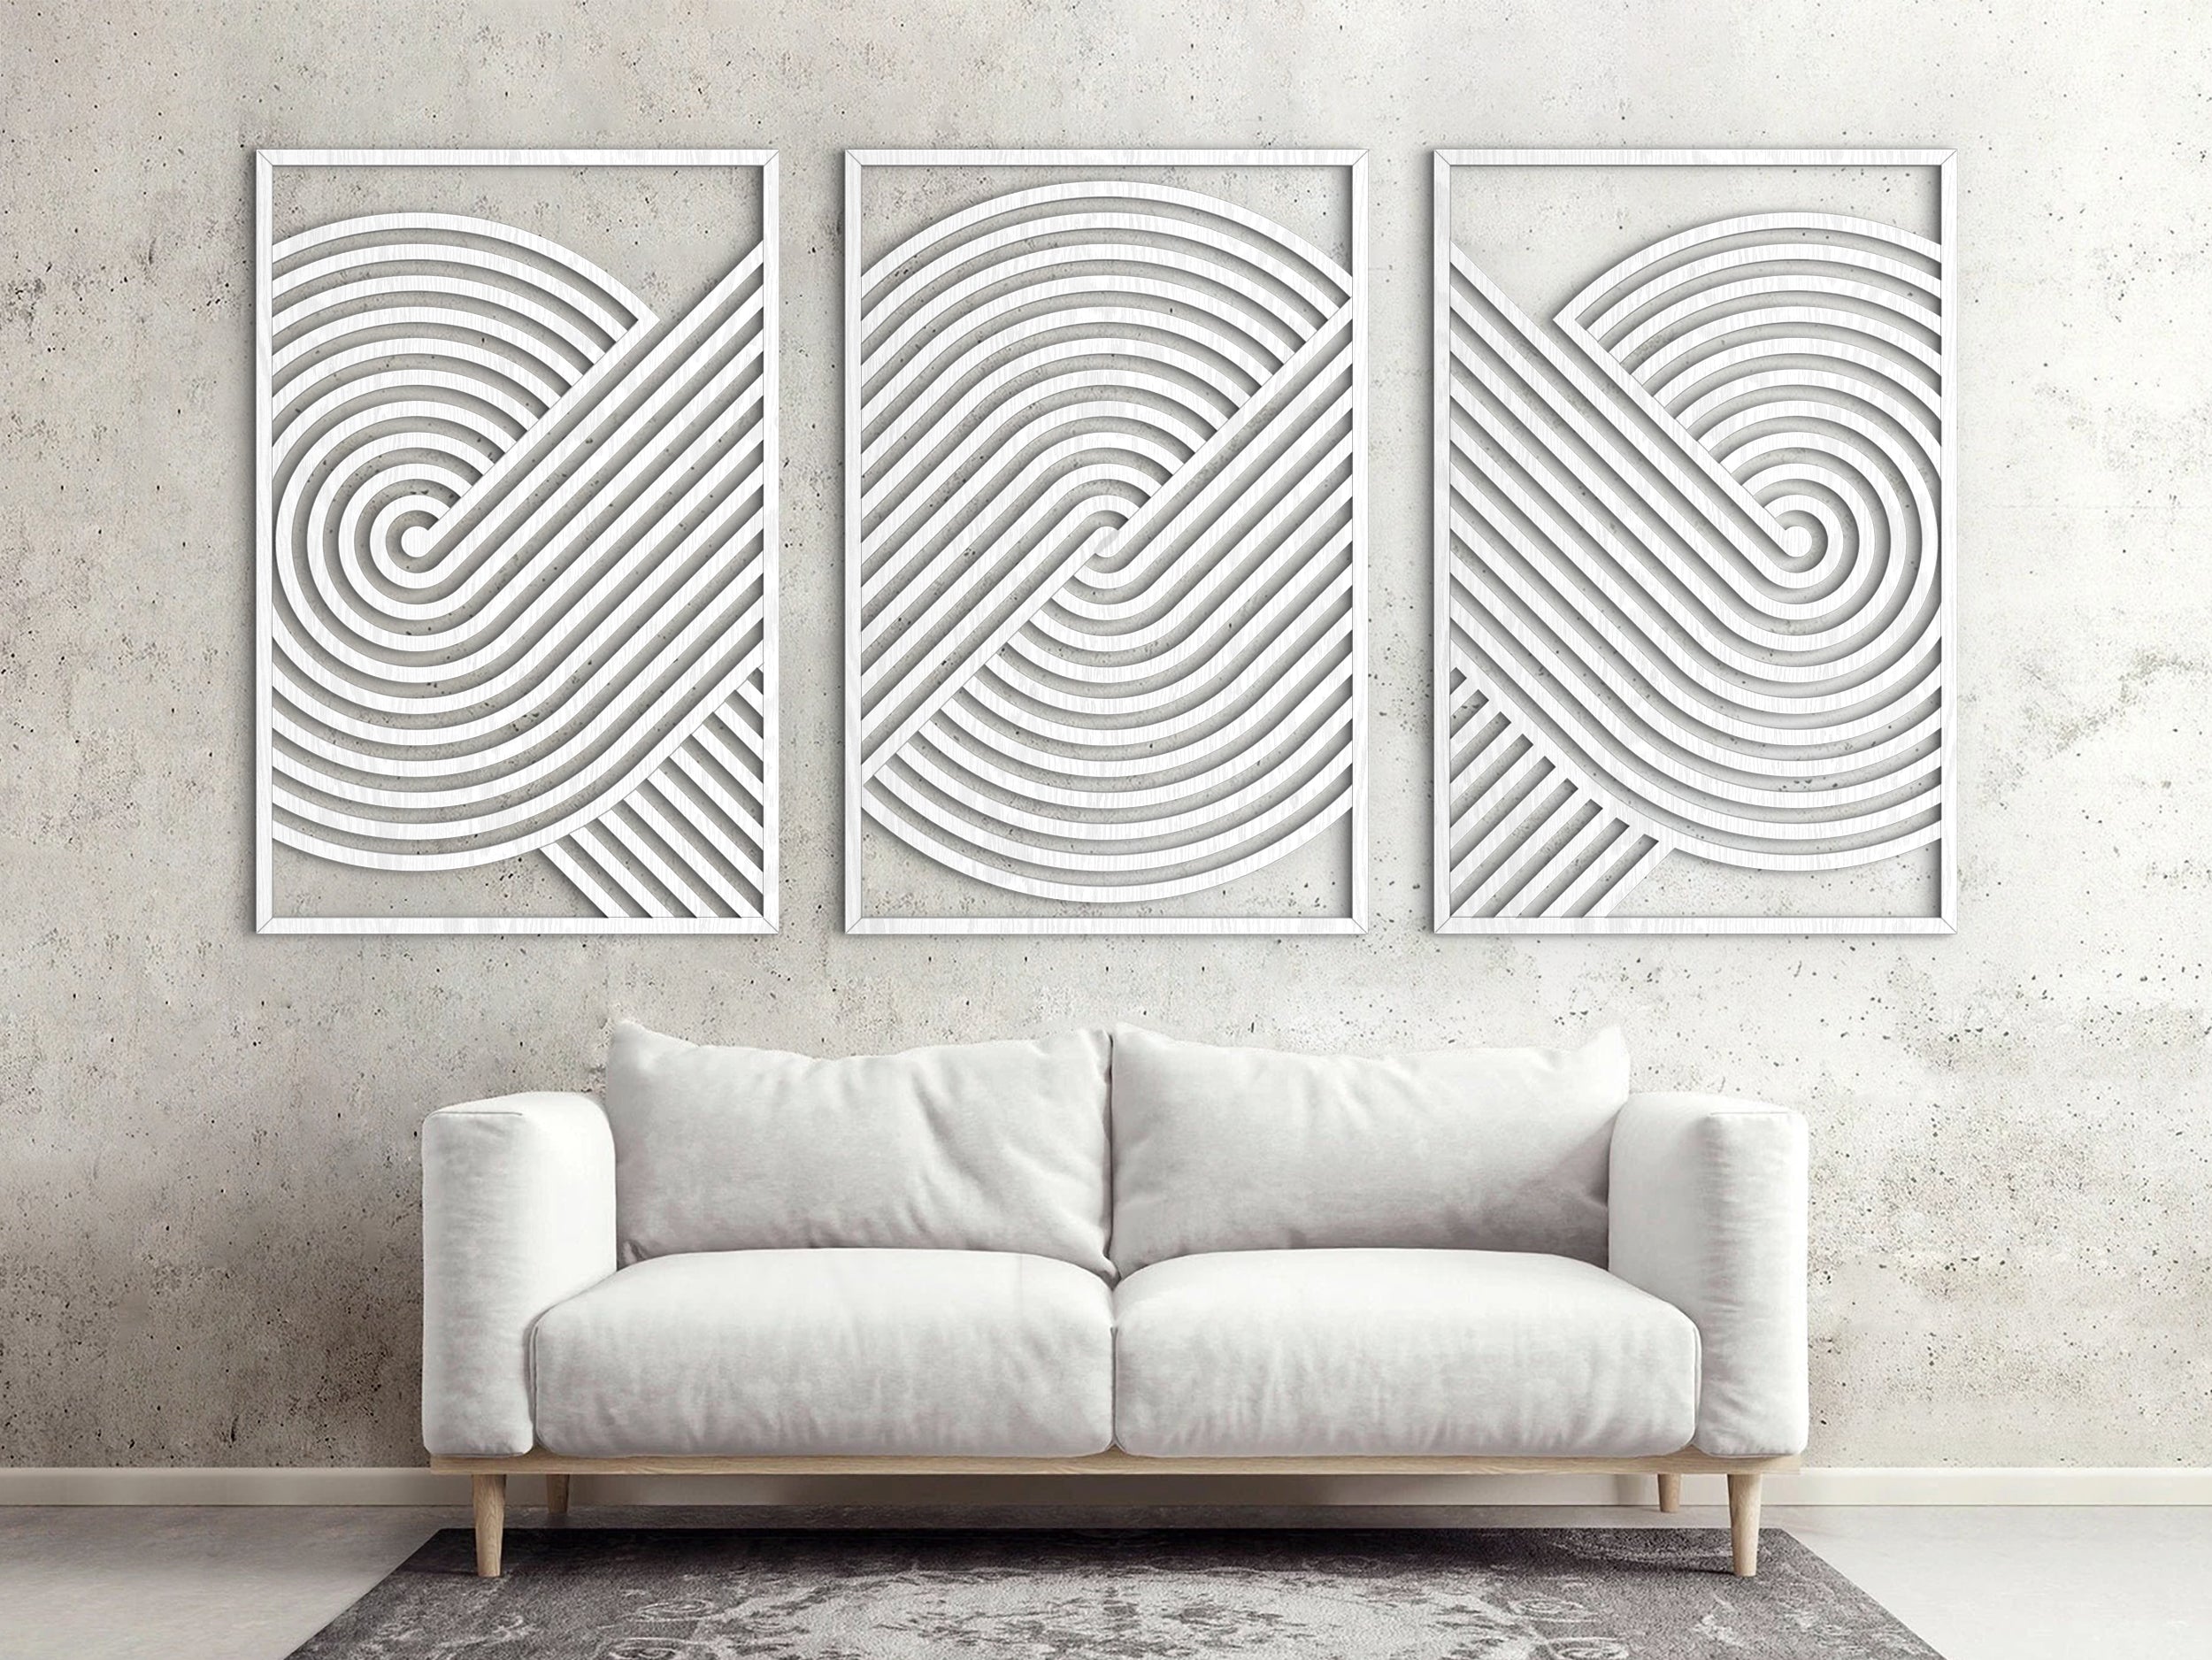 Geometric Wood Wall Art Panel, Geometric Wall Art Set of 3, Geometric  Wooden Wall Decor, Rustic Wall Decor for a Large Wall, Above Bed Decor 